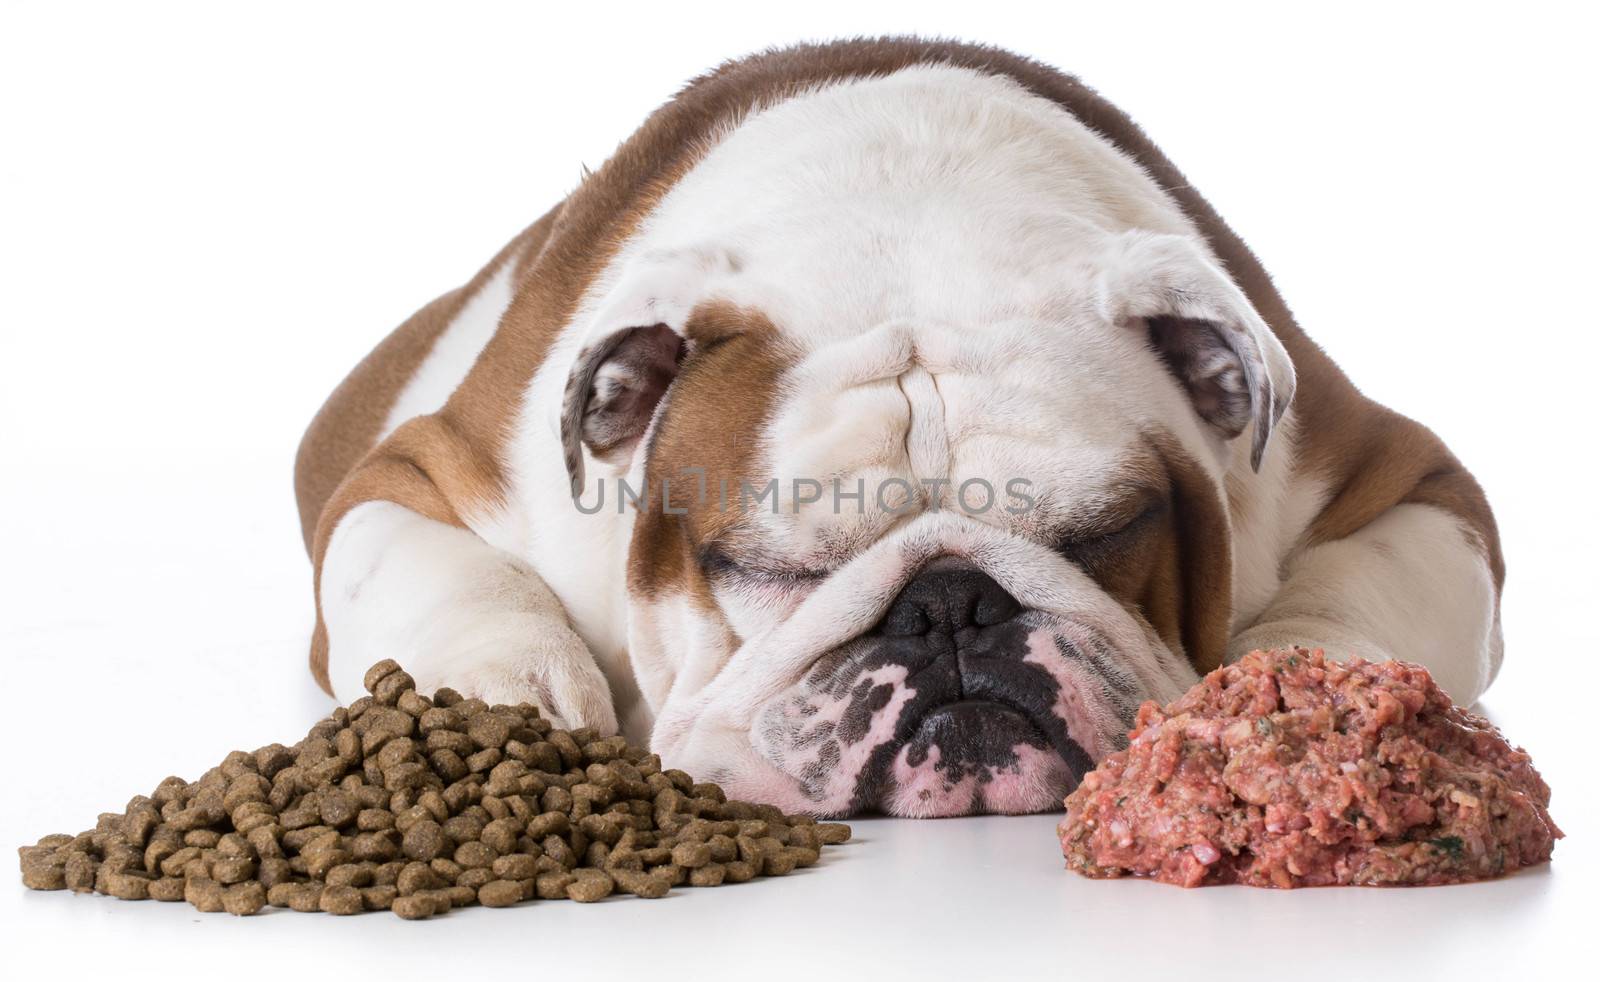 kibble or raw dog food by willeecole123